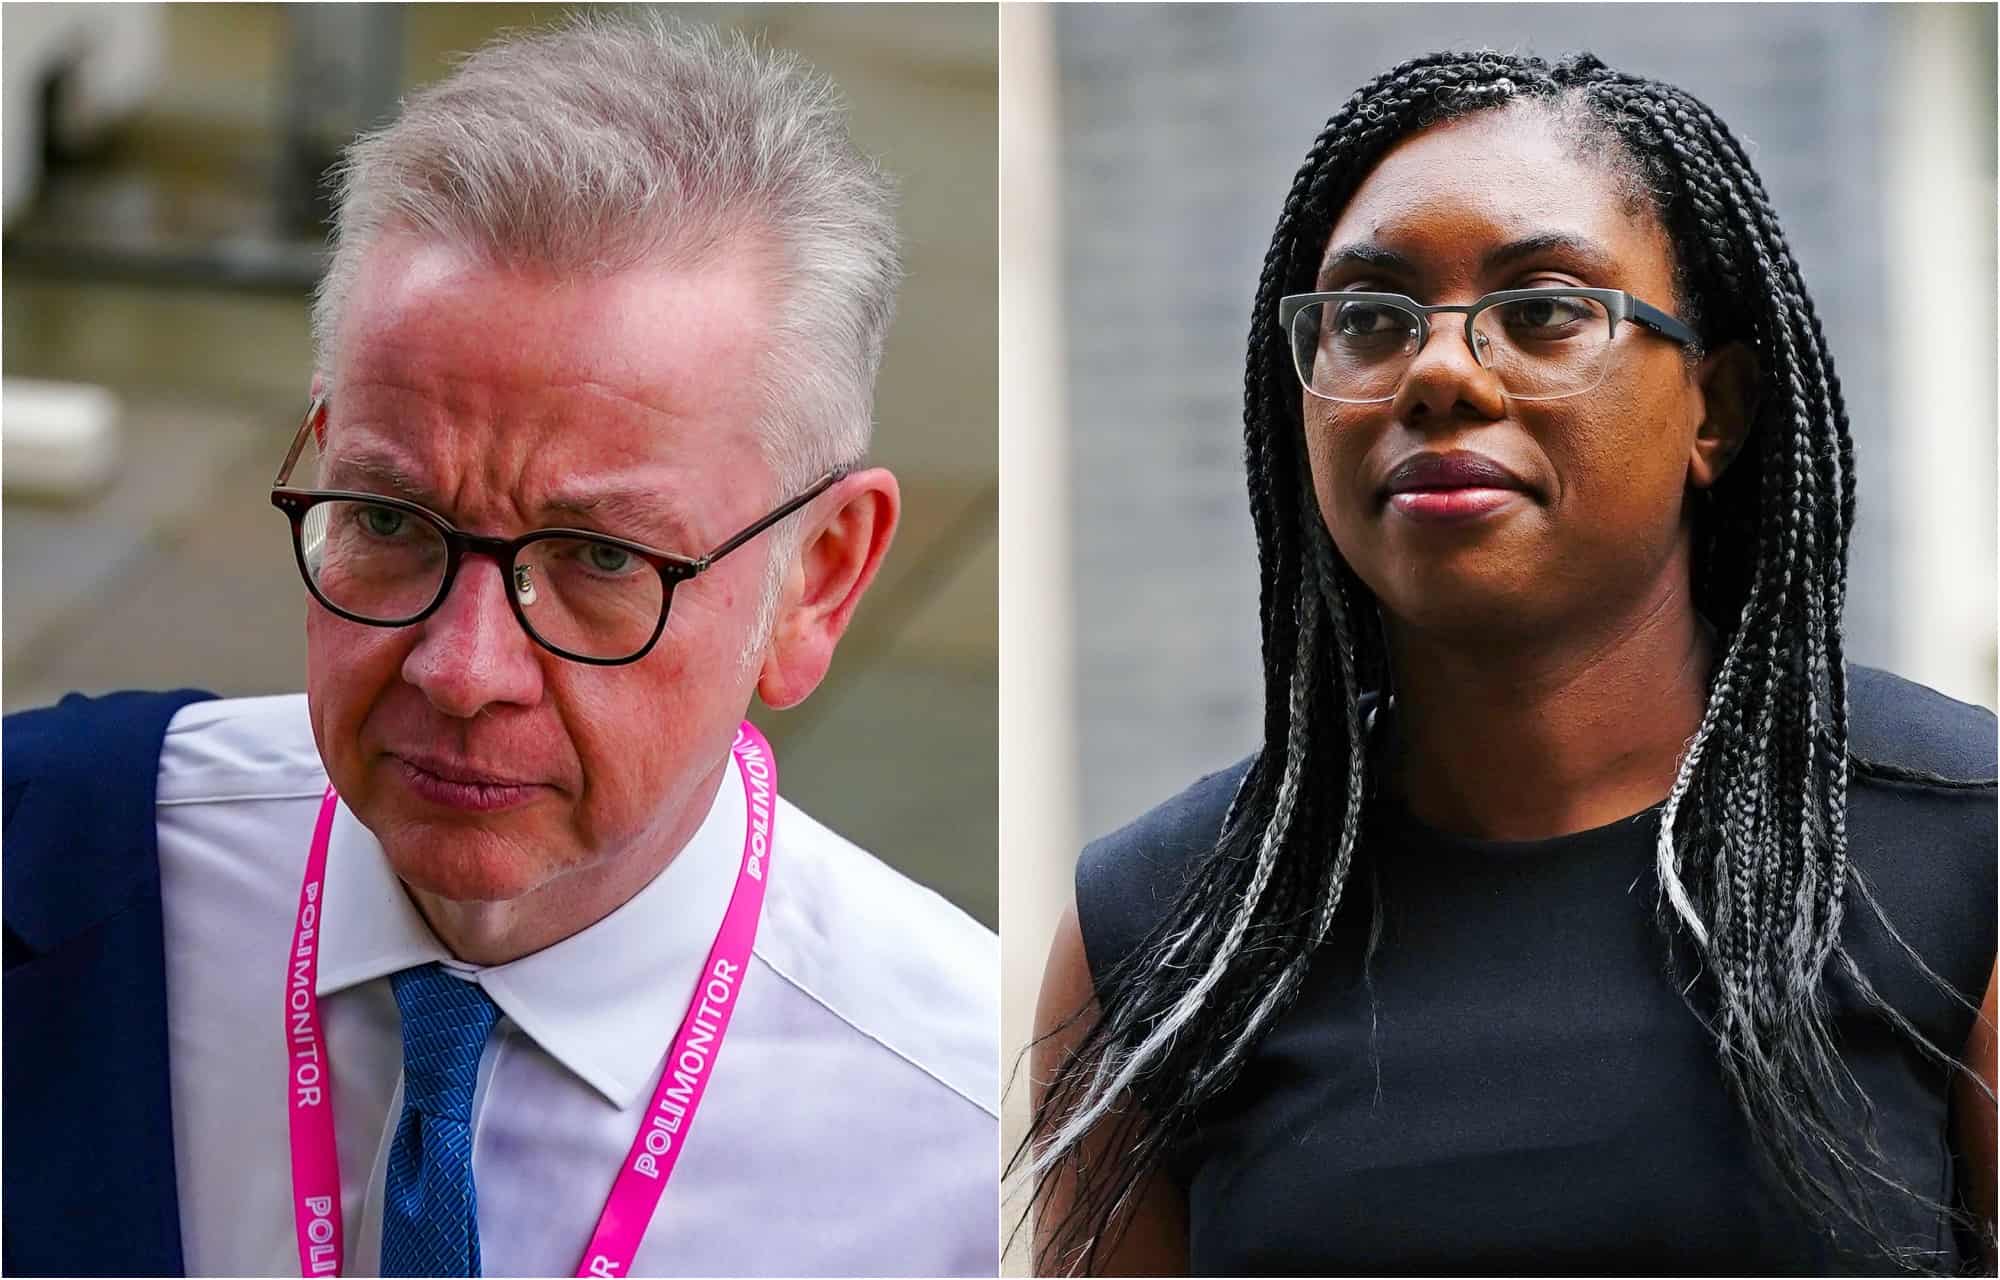 Gove and Badenoch back keeping open option of quitting ECHR